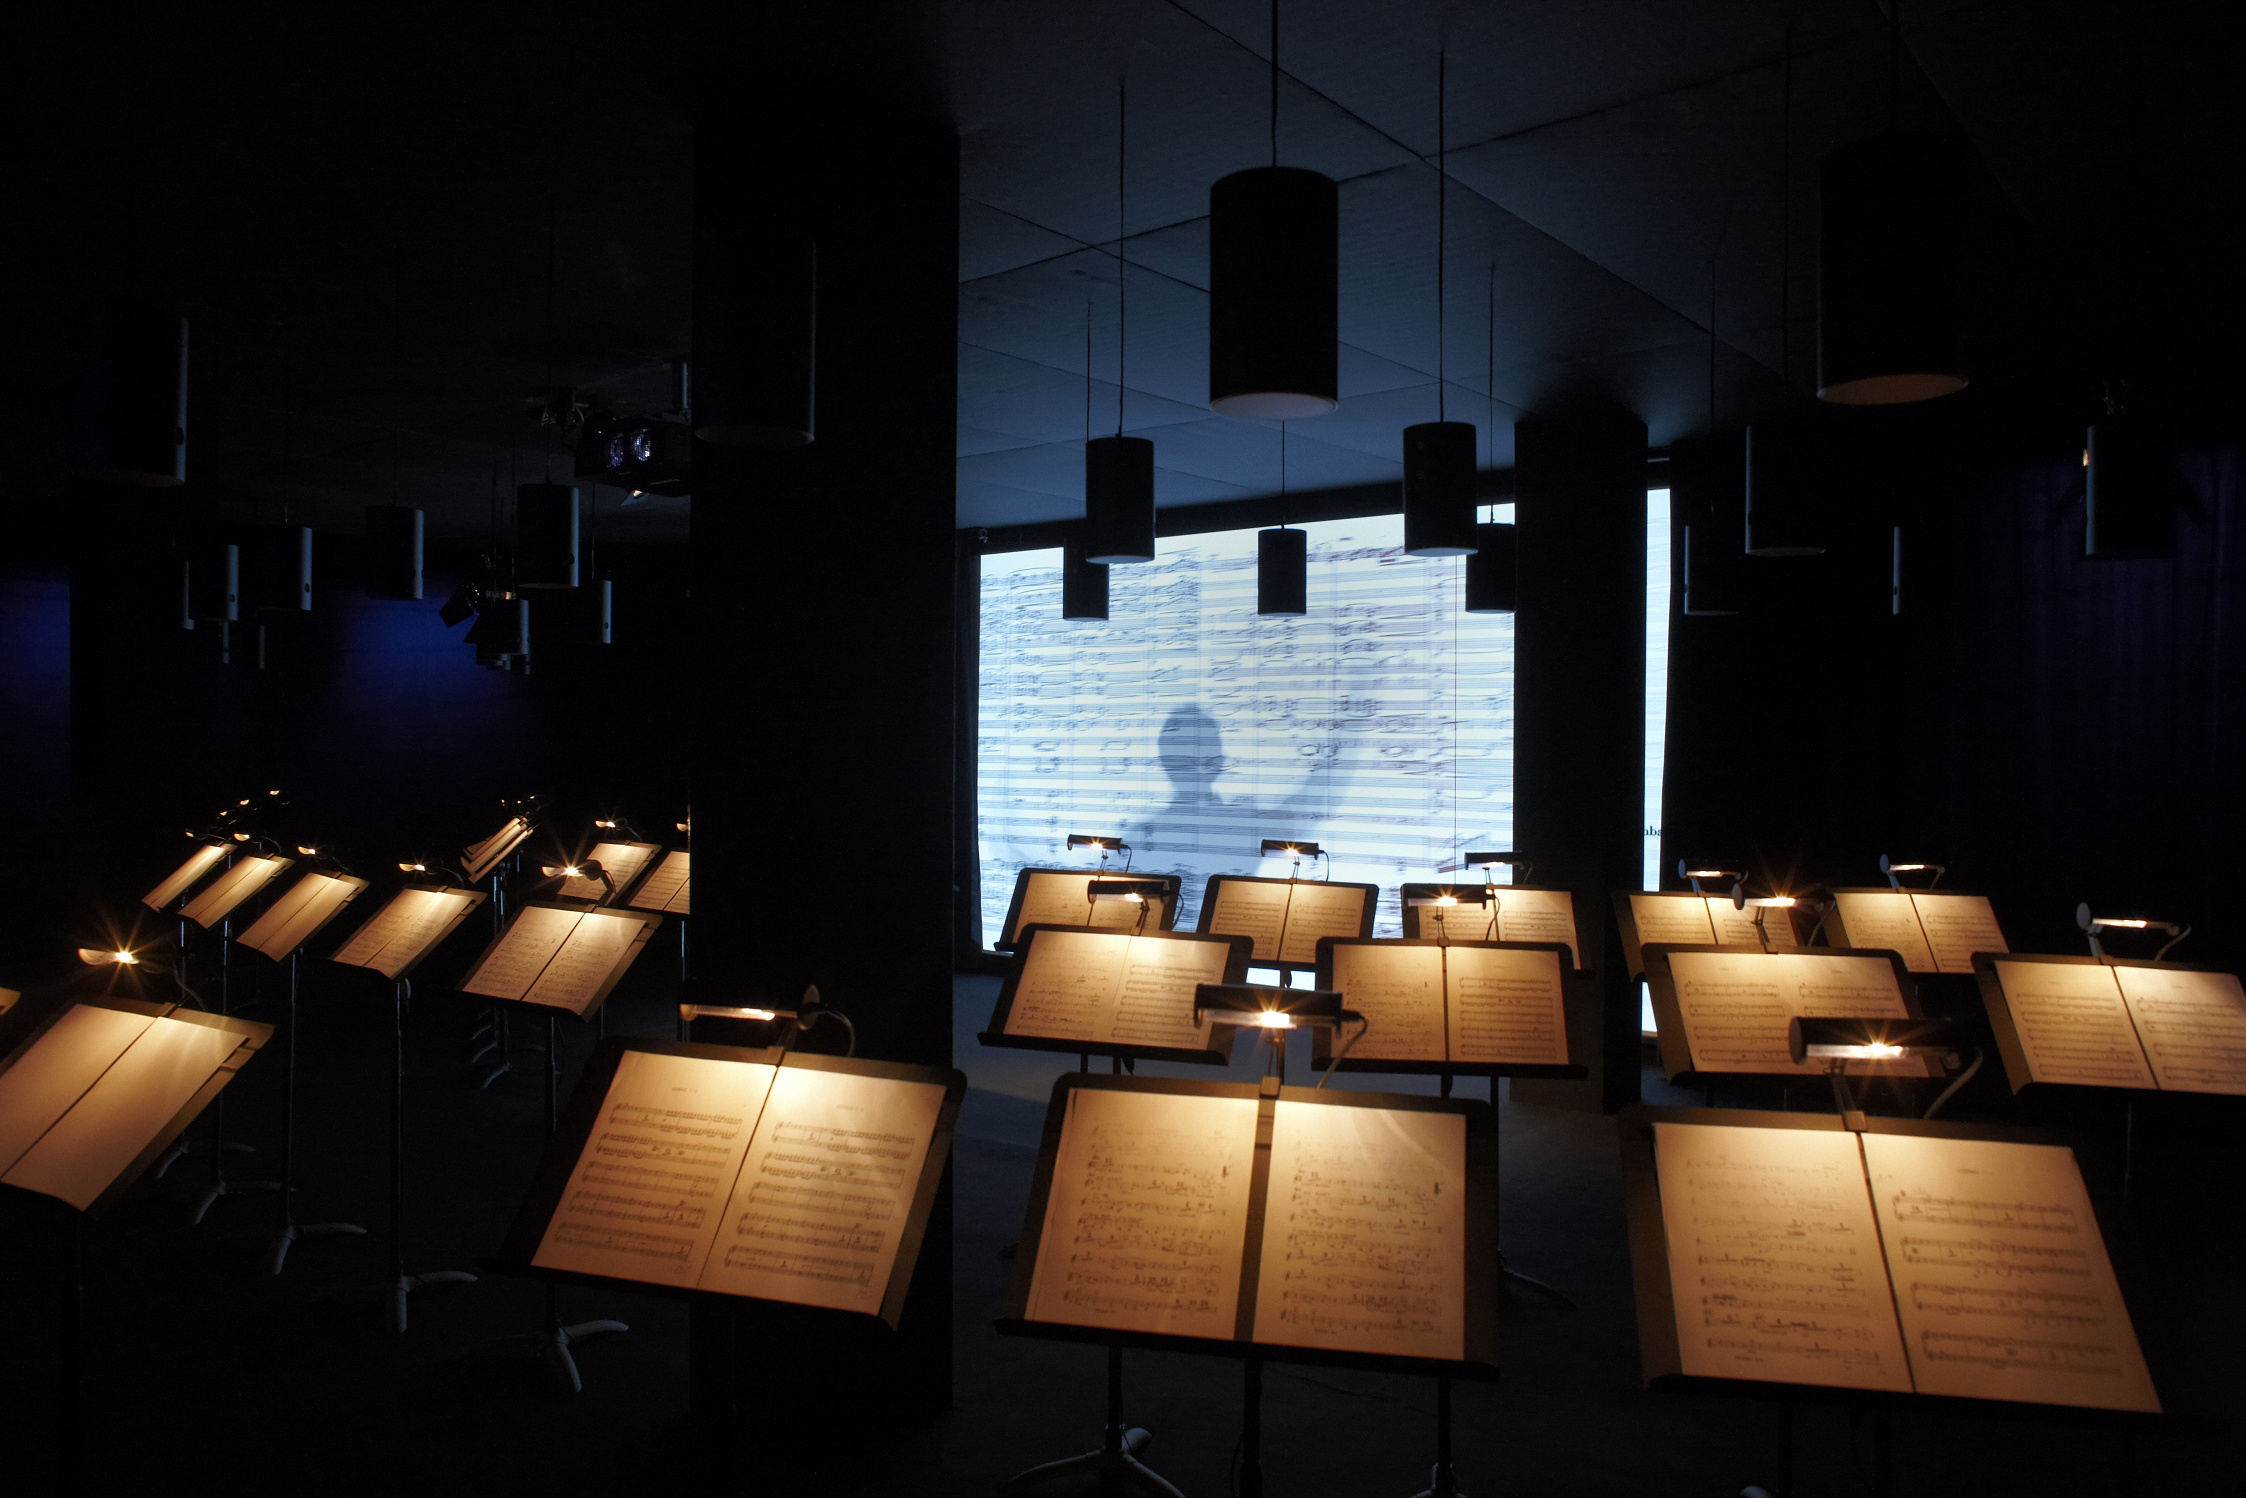 Exhibition “That’s Opera” interactive orchestra